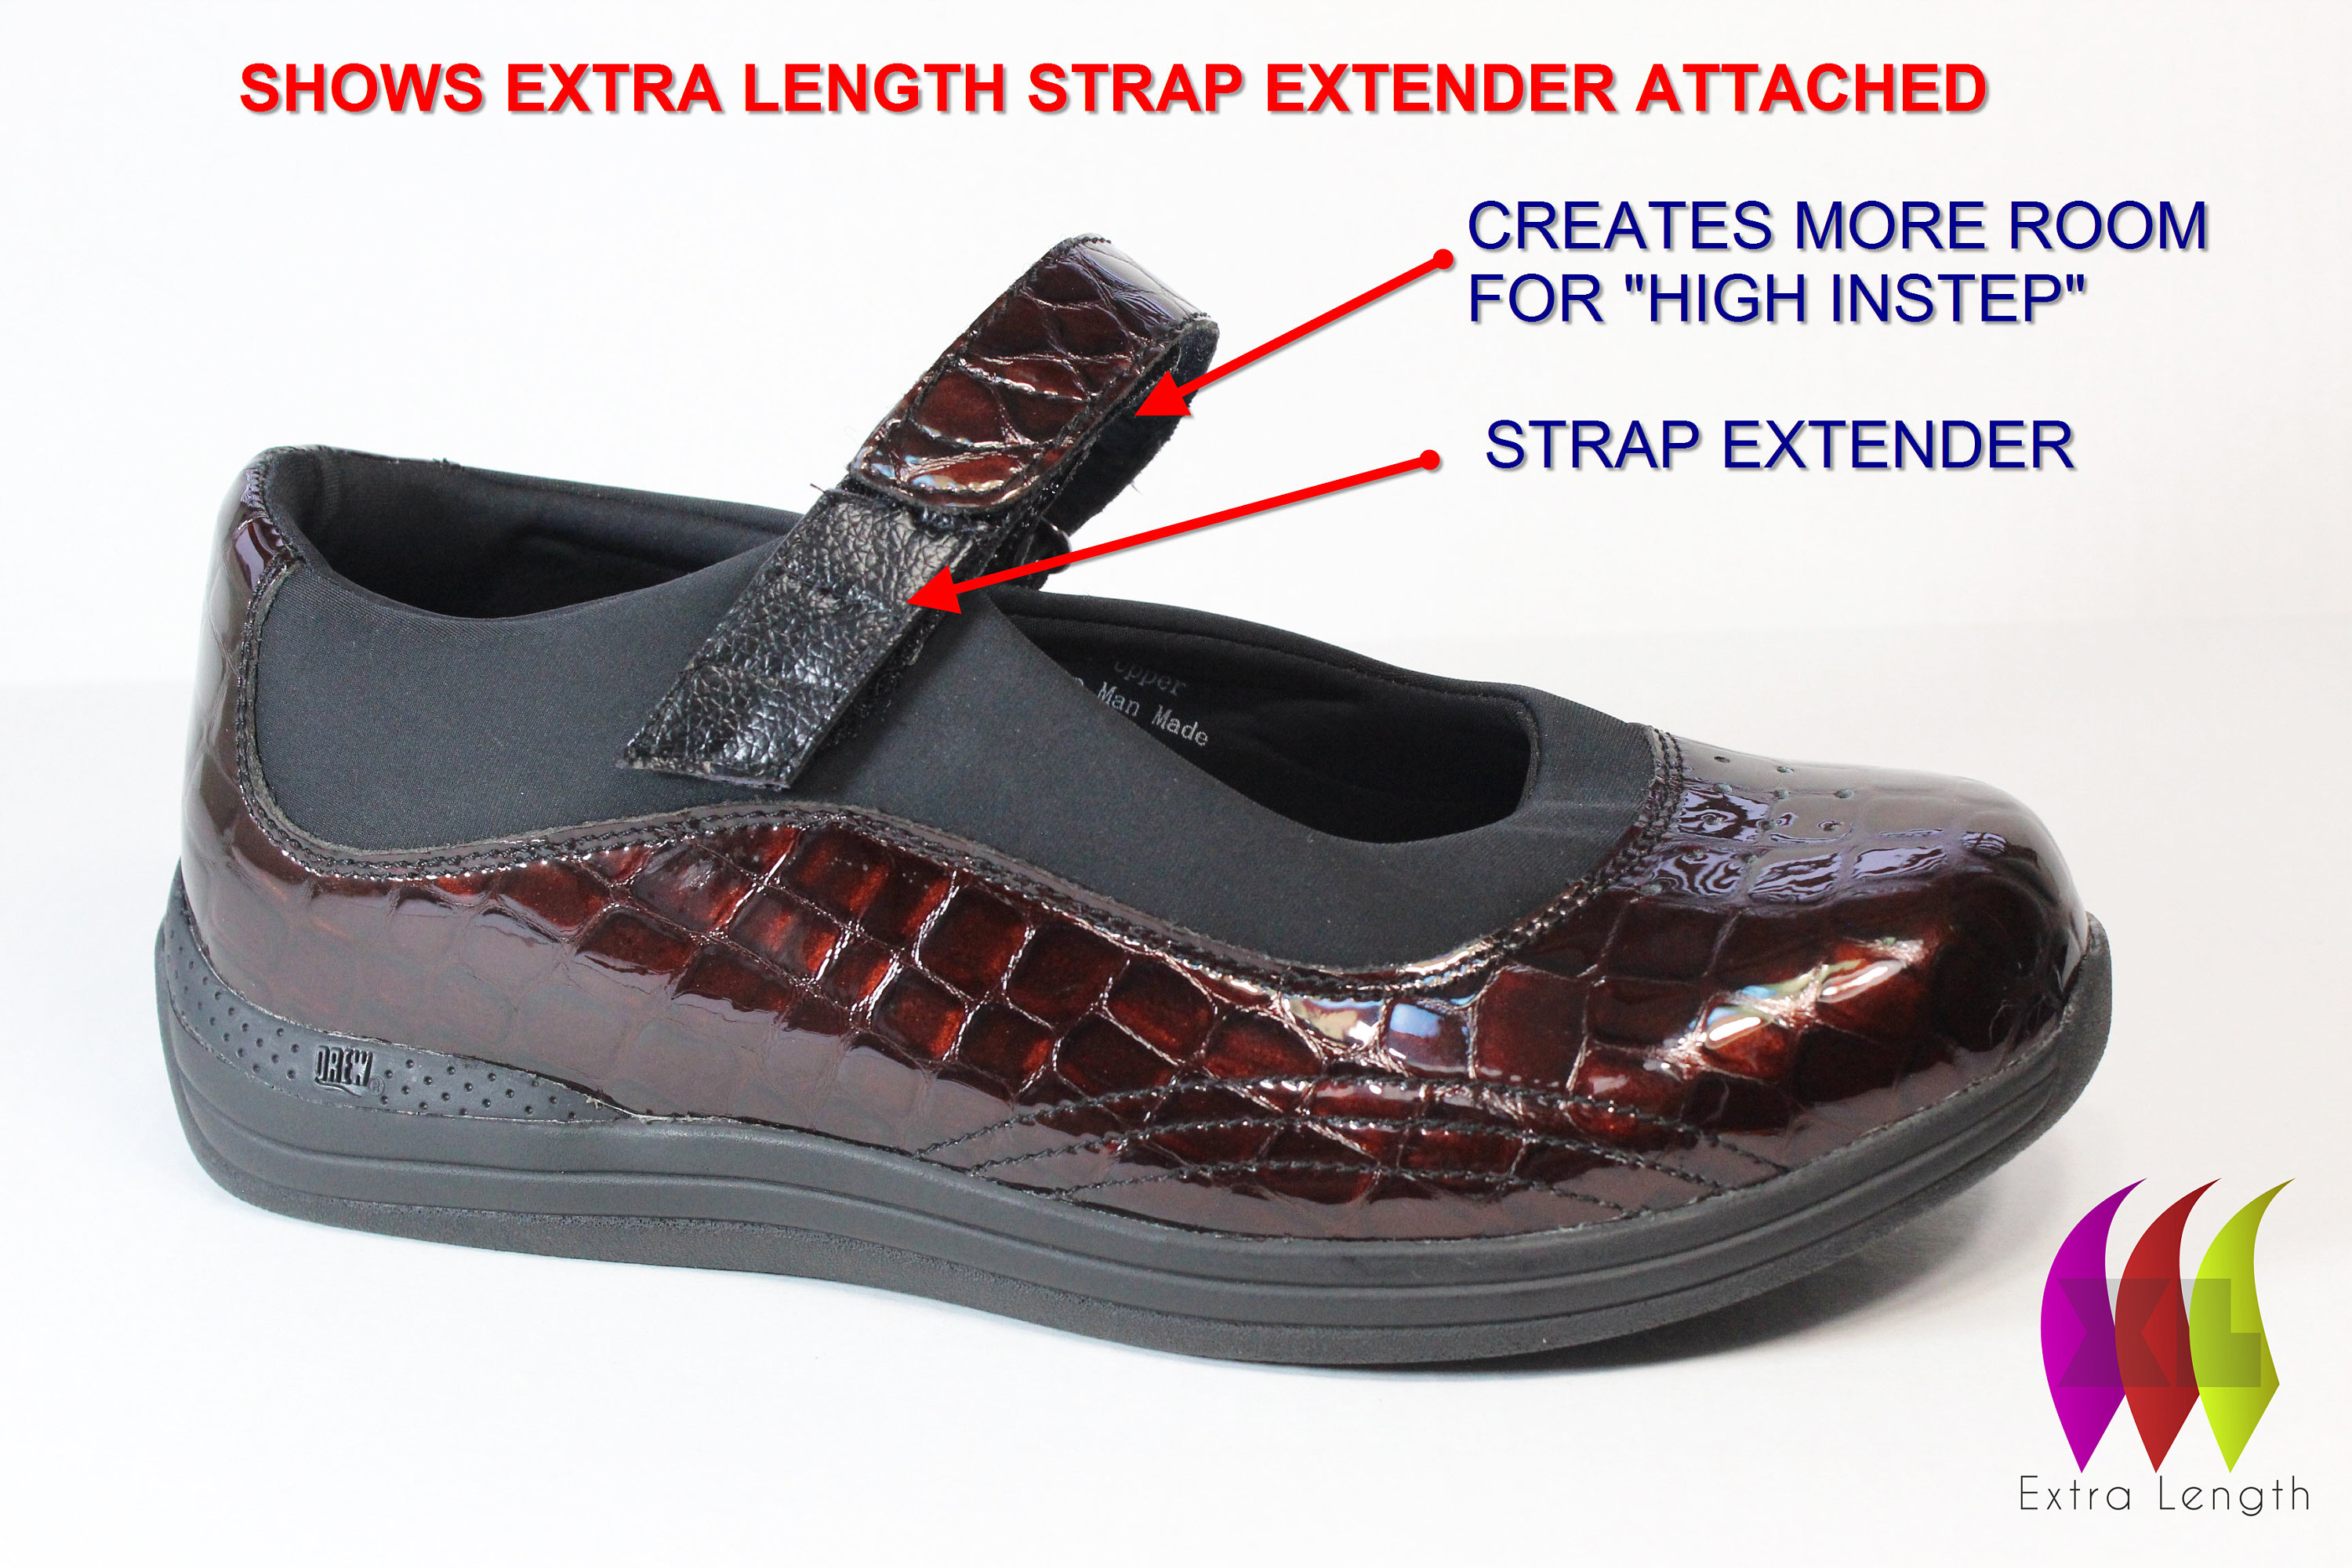 Shoe Straps Extenders Easily Add Length and Width for High Insteps & Wide Shoes! Add Yourself! Made Using Velcro Brand Fastener Material!